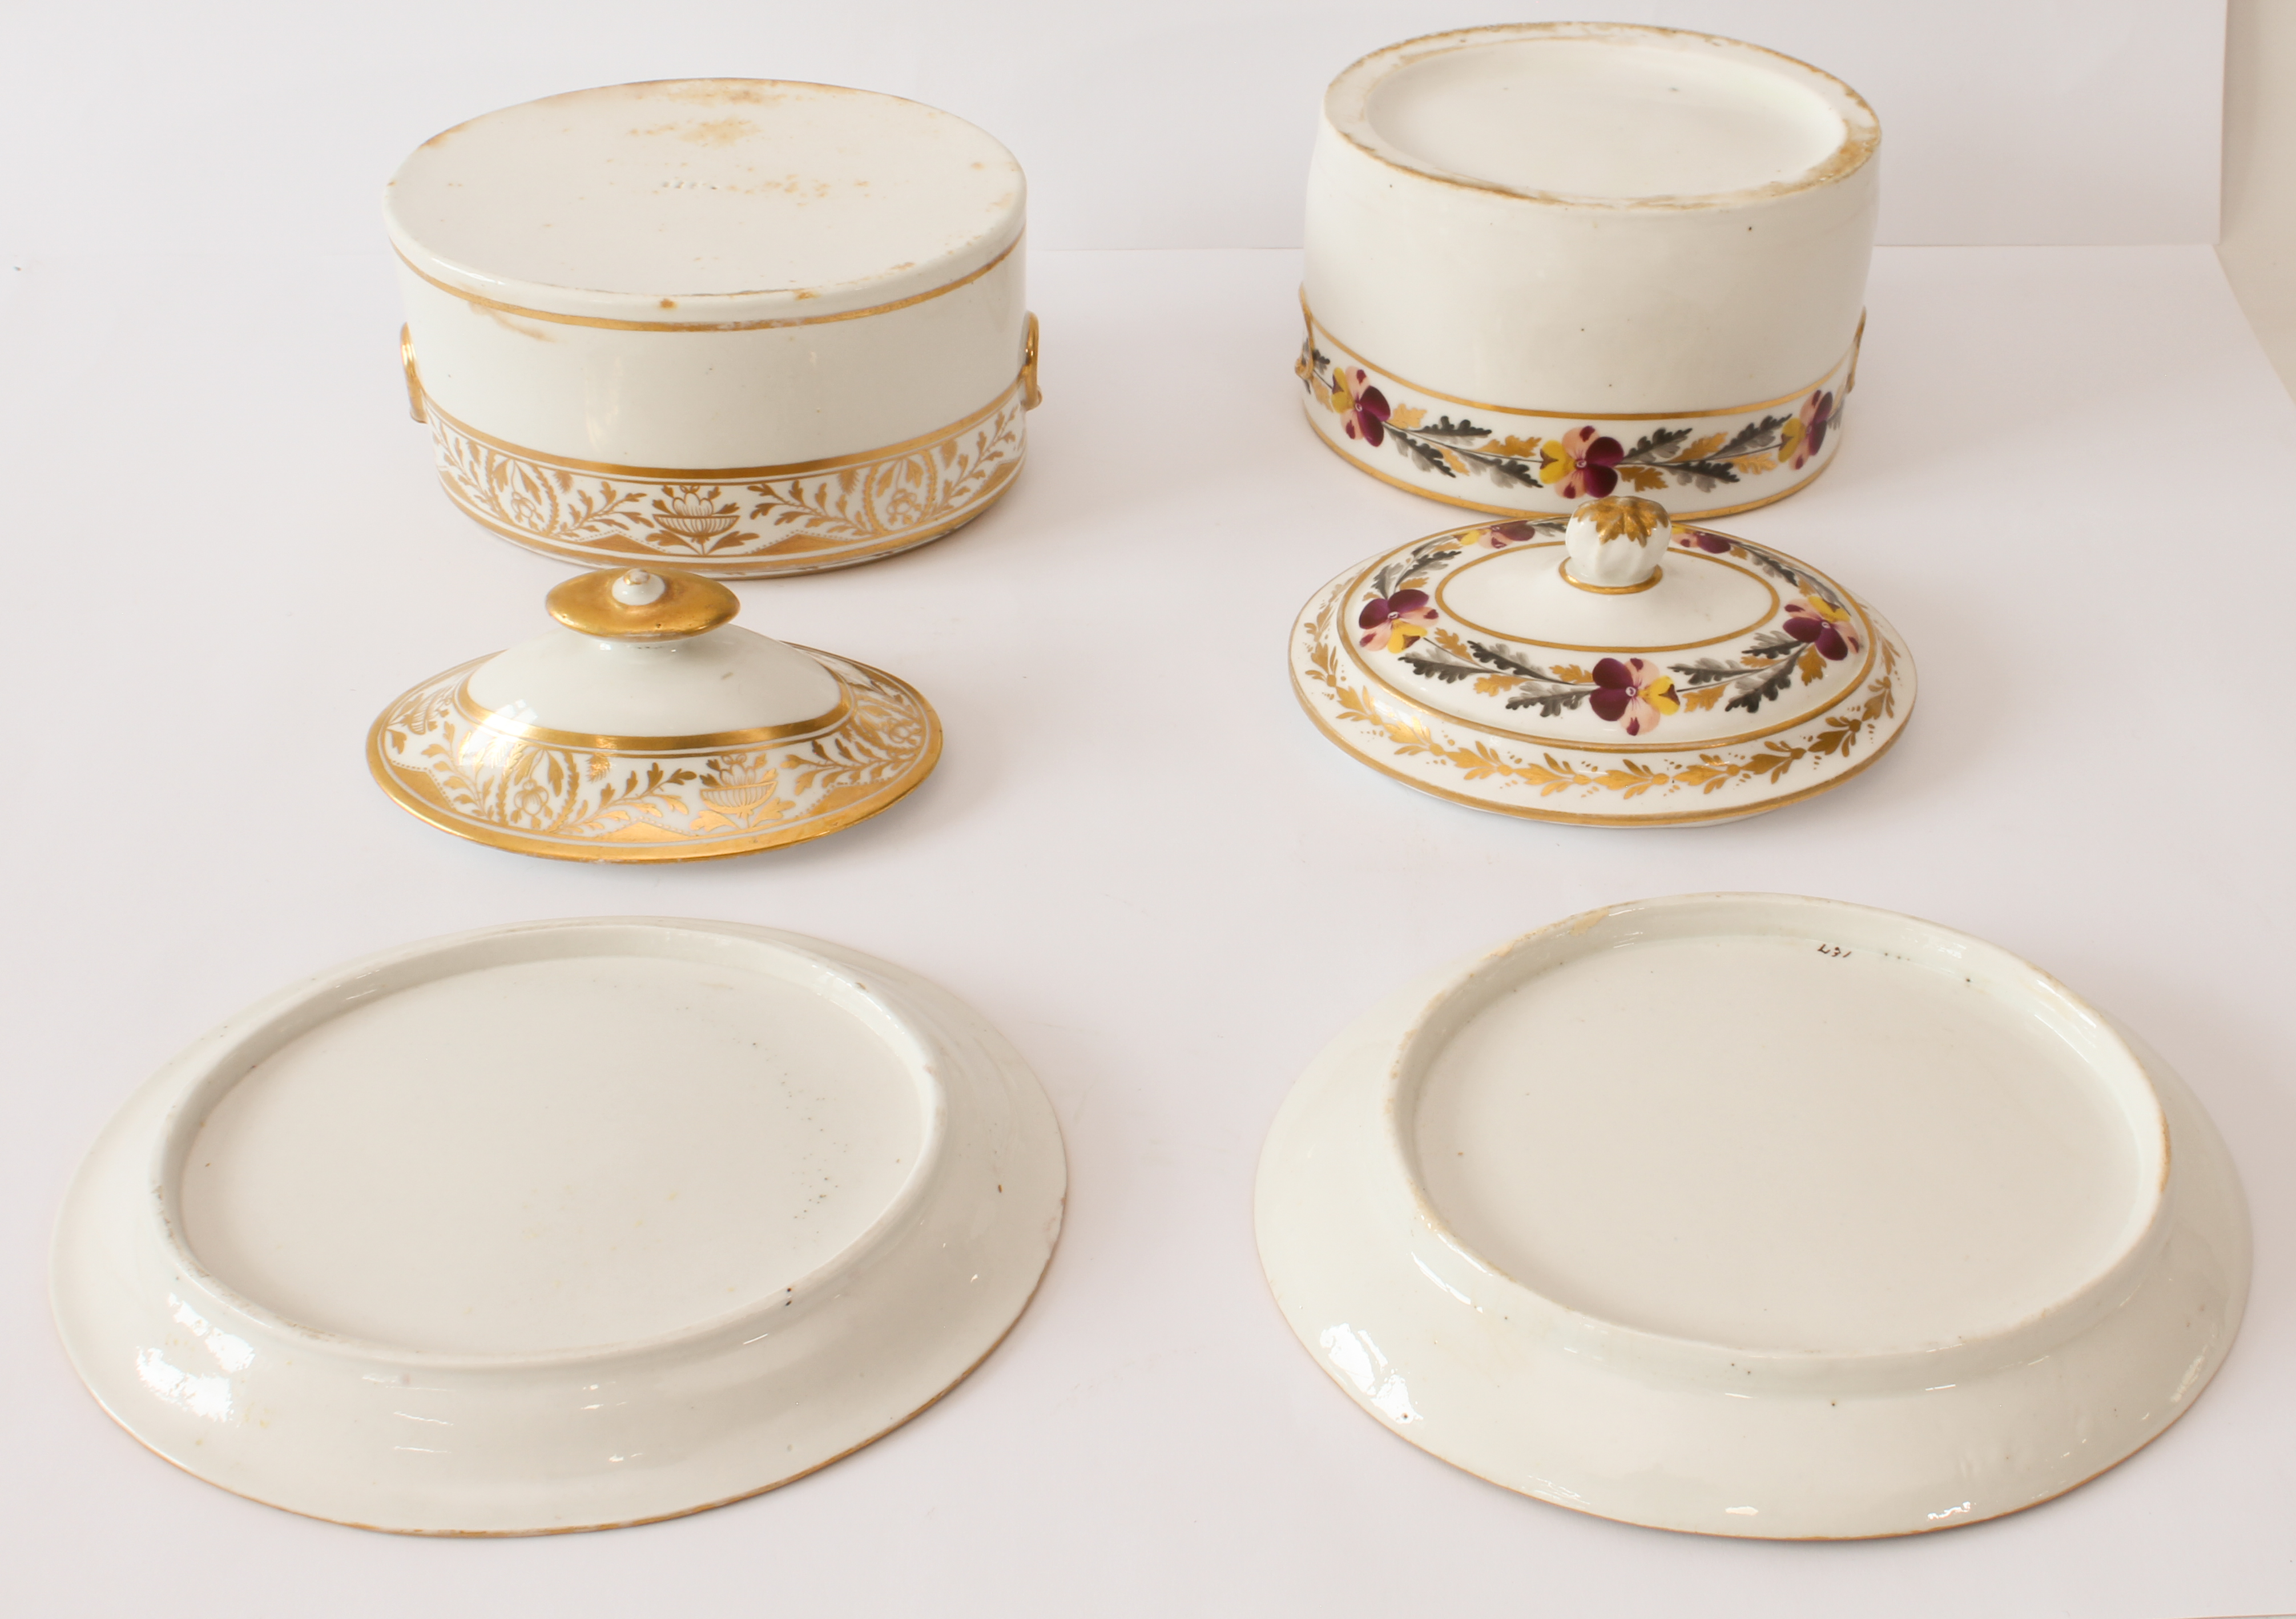 Two 19th century English porcelain oval sugar boxes and closely matched stands - one decorated - Image 4 of 6